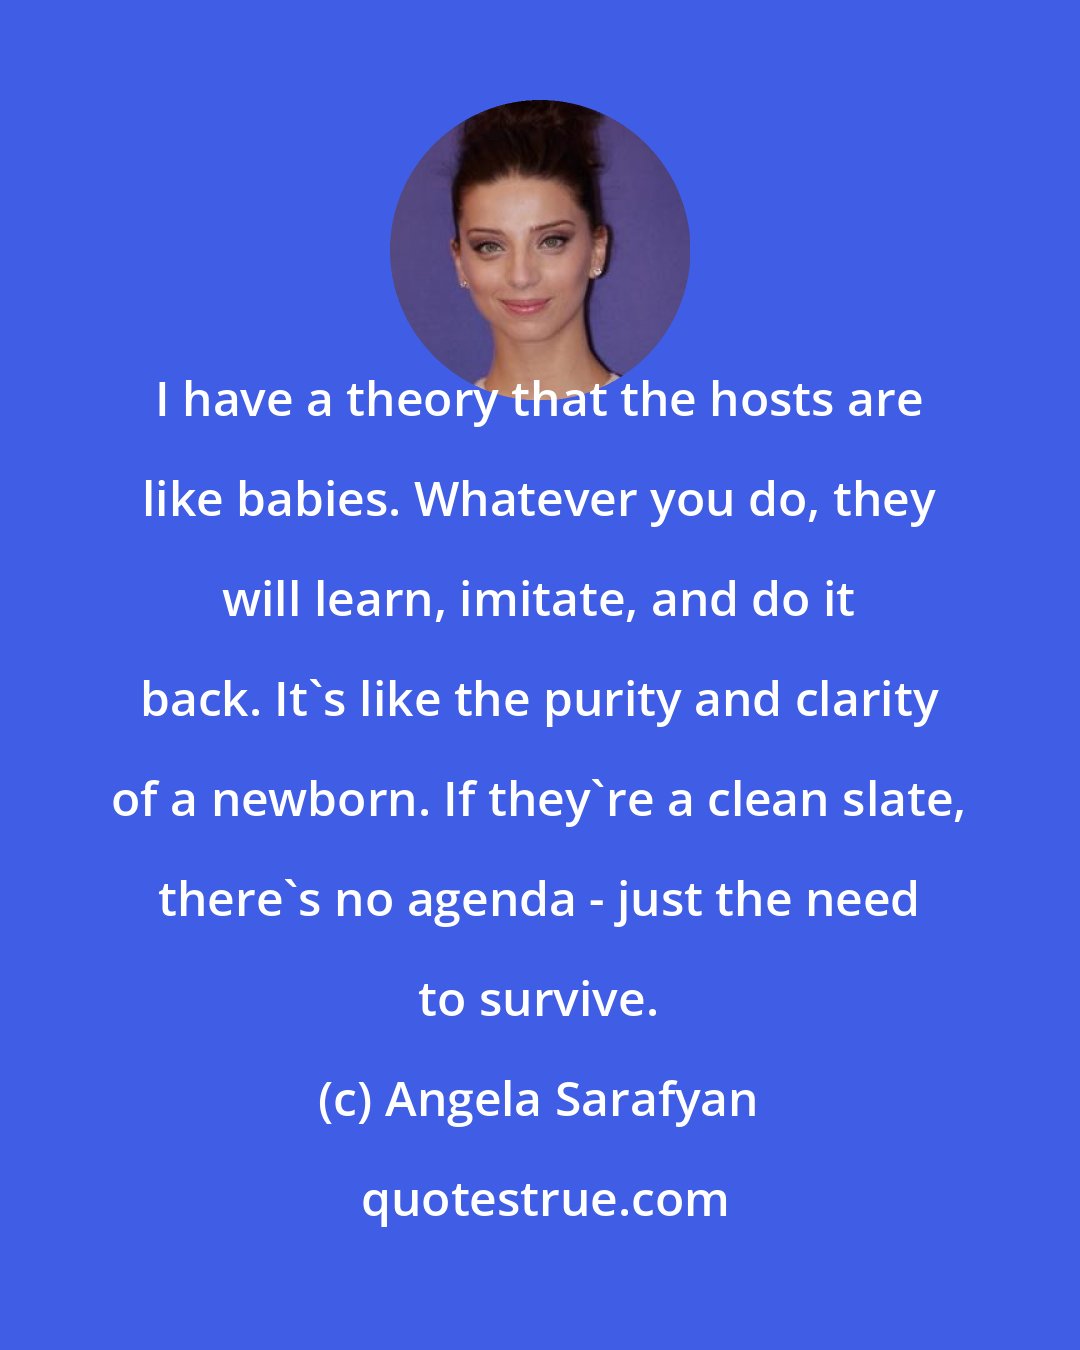 Angela Sarafyan: I have a theory that the hosts are like babies. Whatever you do, they will learn, imitate, and do it back. It's like the purity and clarity of a newborn. If they're a clean slate, there's no agenda - just the need to survive.